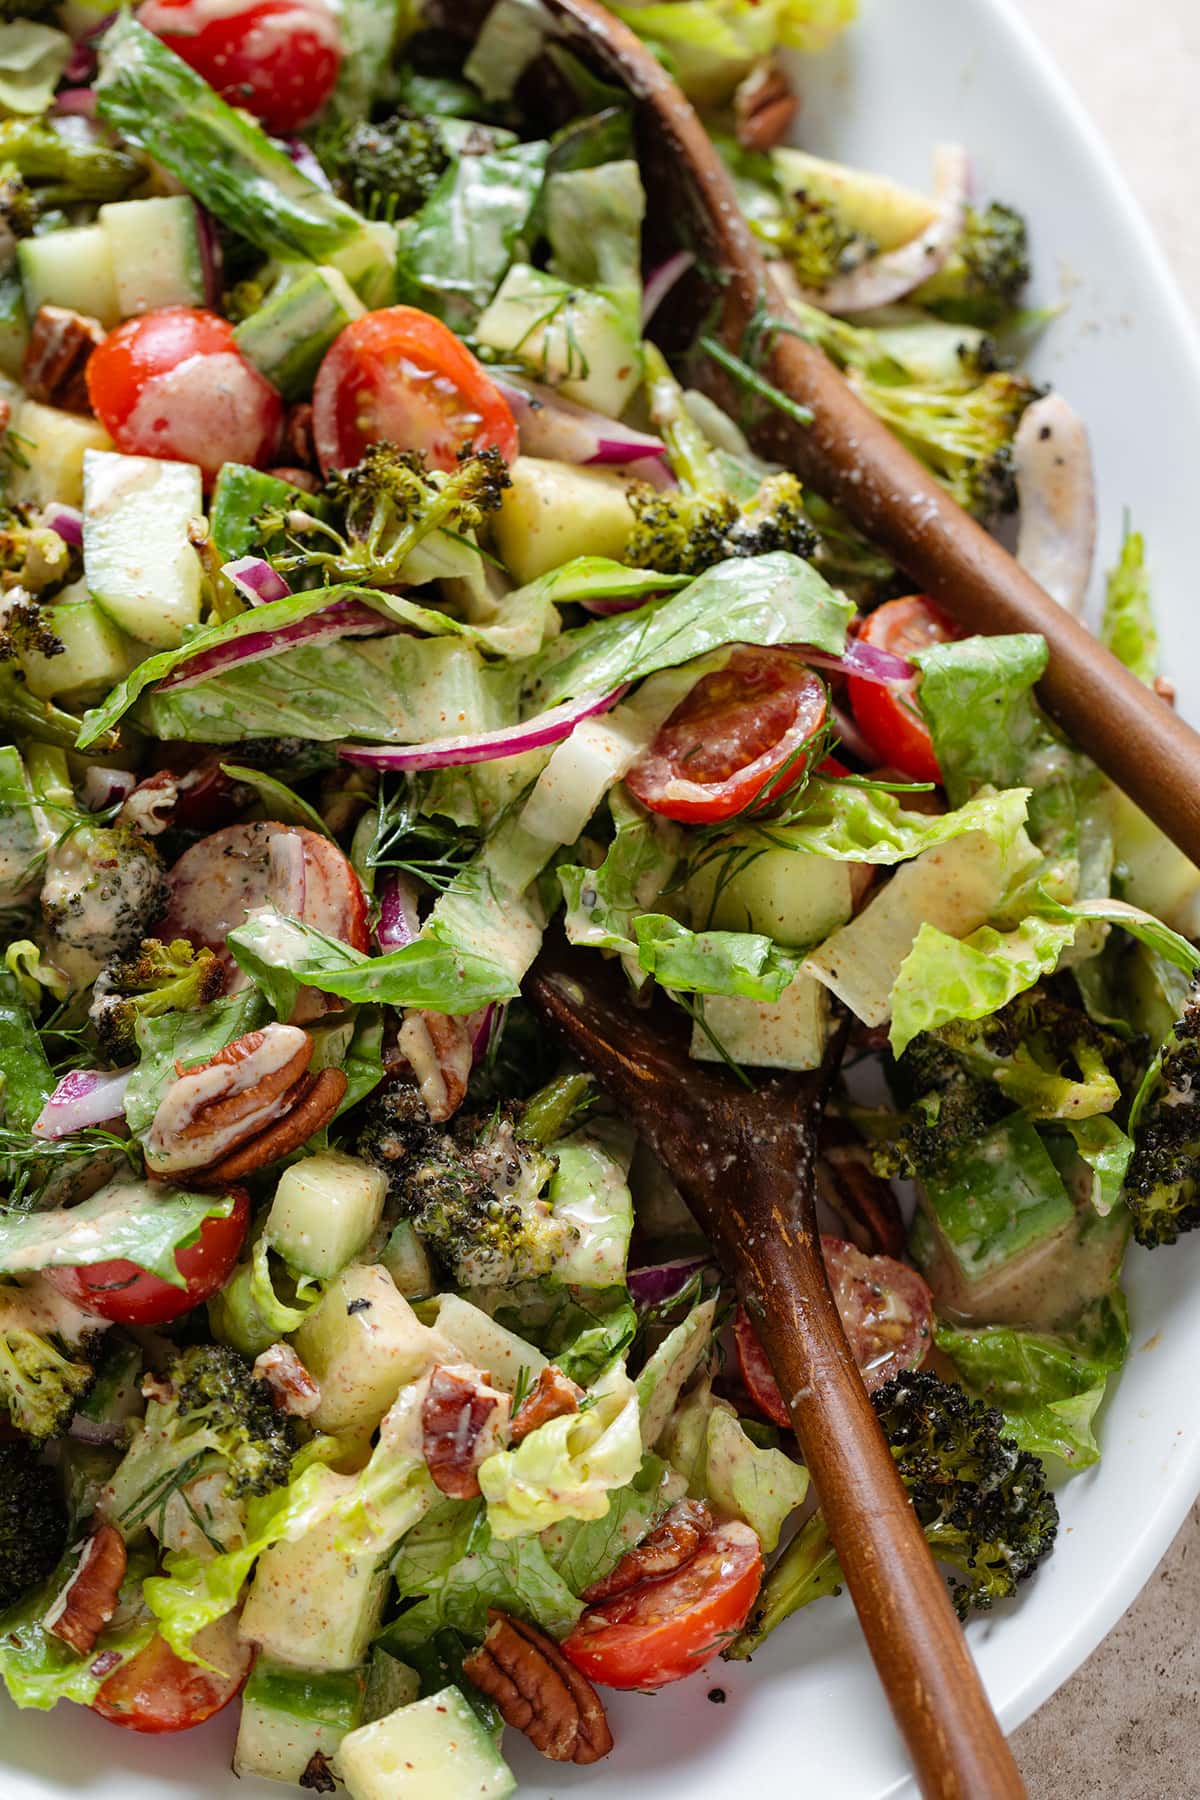 Chopped salad with roasted broccoli, romaine, cherry tomatoes, other vegetables, and creamy dressing on a white serving platter with two wooden spoons on the right.